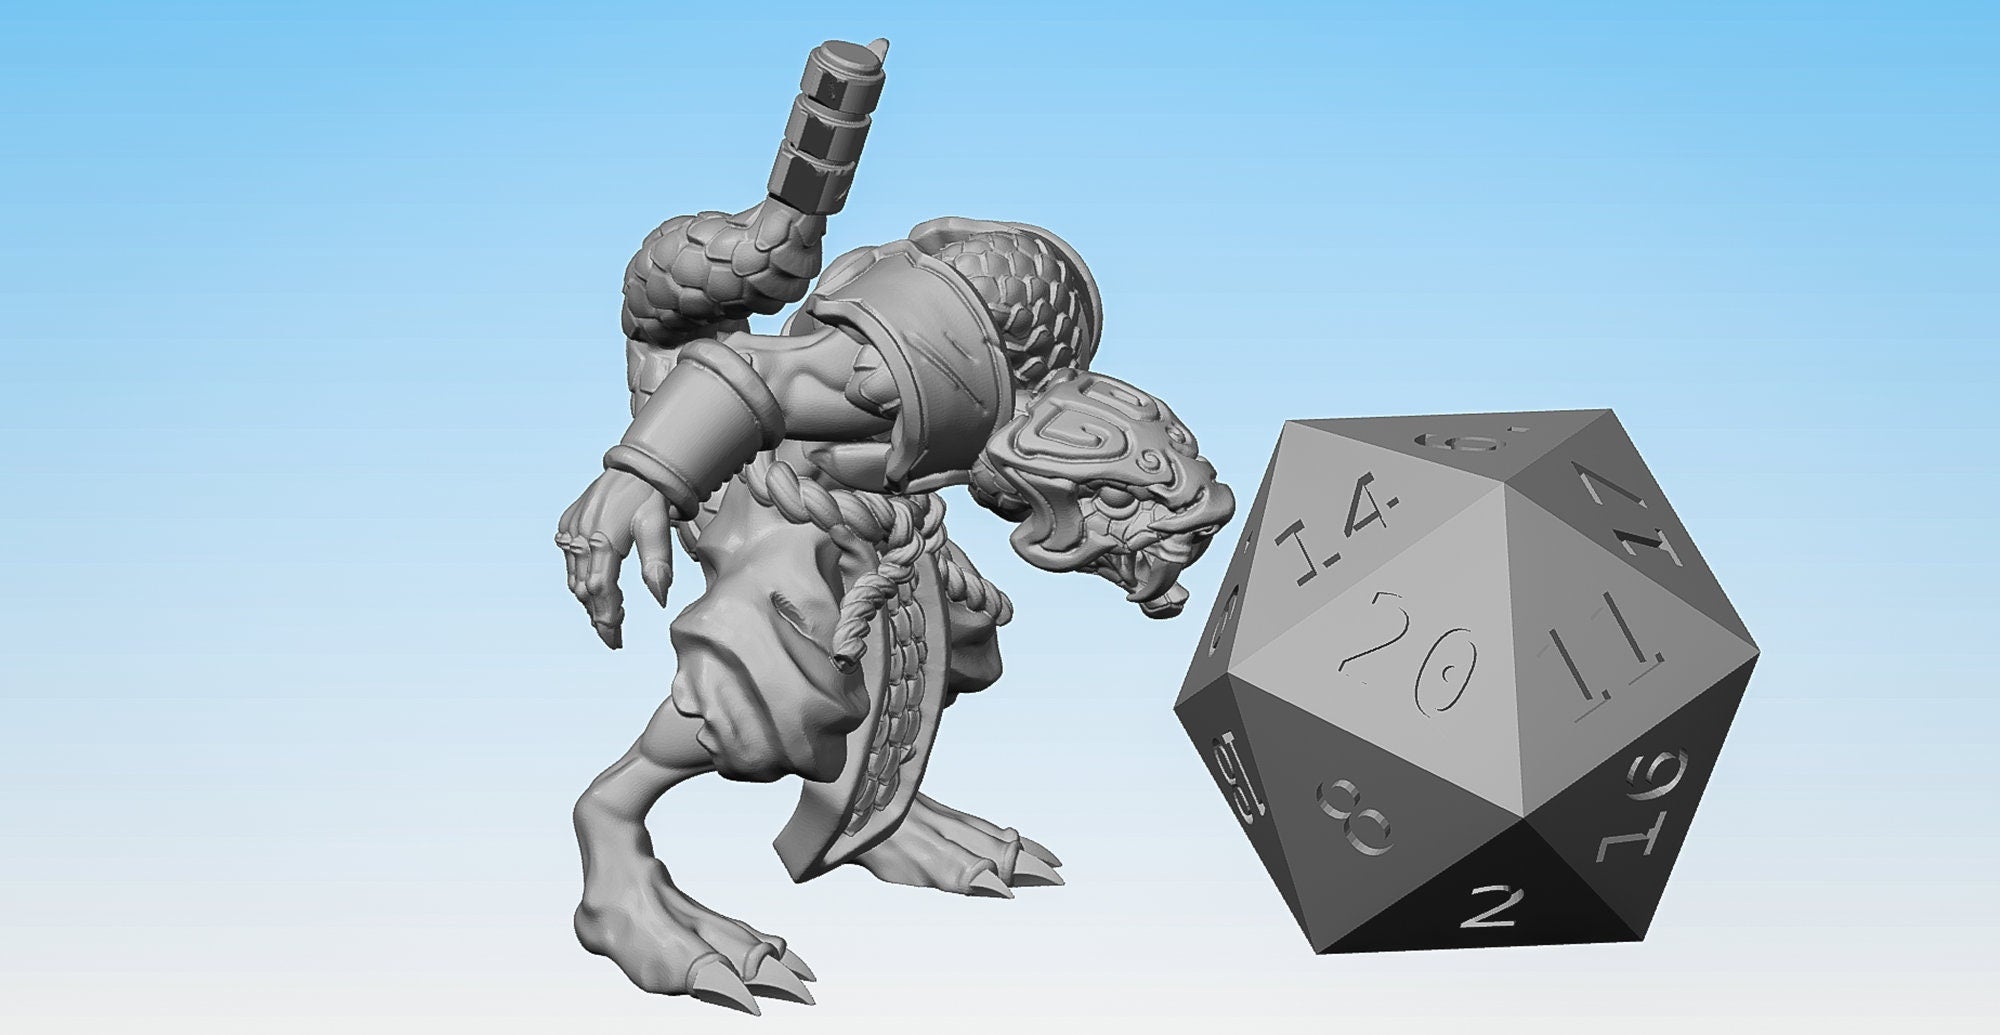 YUAN-TI Malison "Brawler" | Dungeons and Dragons | DnD | Pathfinder | Tabletop | RPG | Hero Size | 28 mm-Role Playing Miniatures